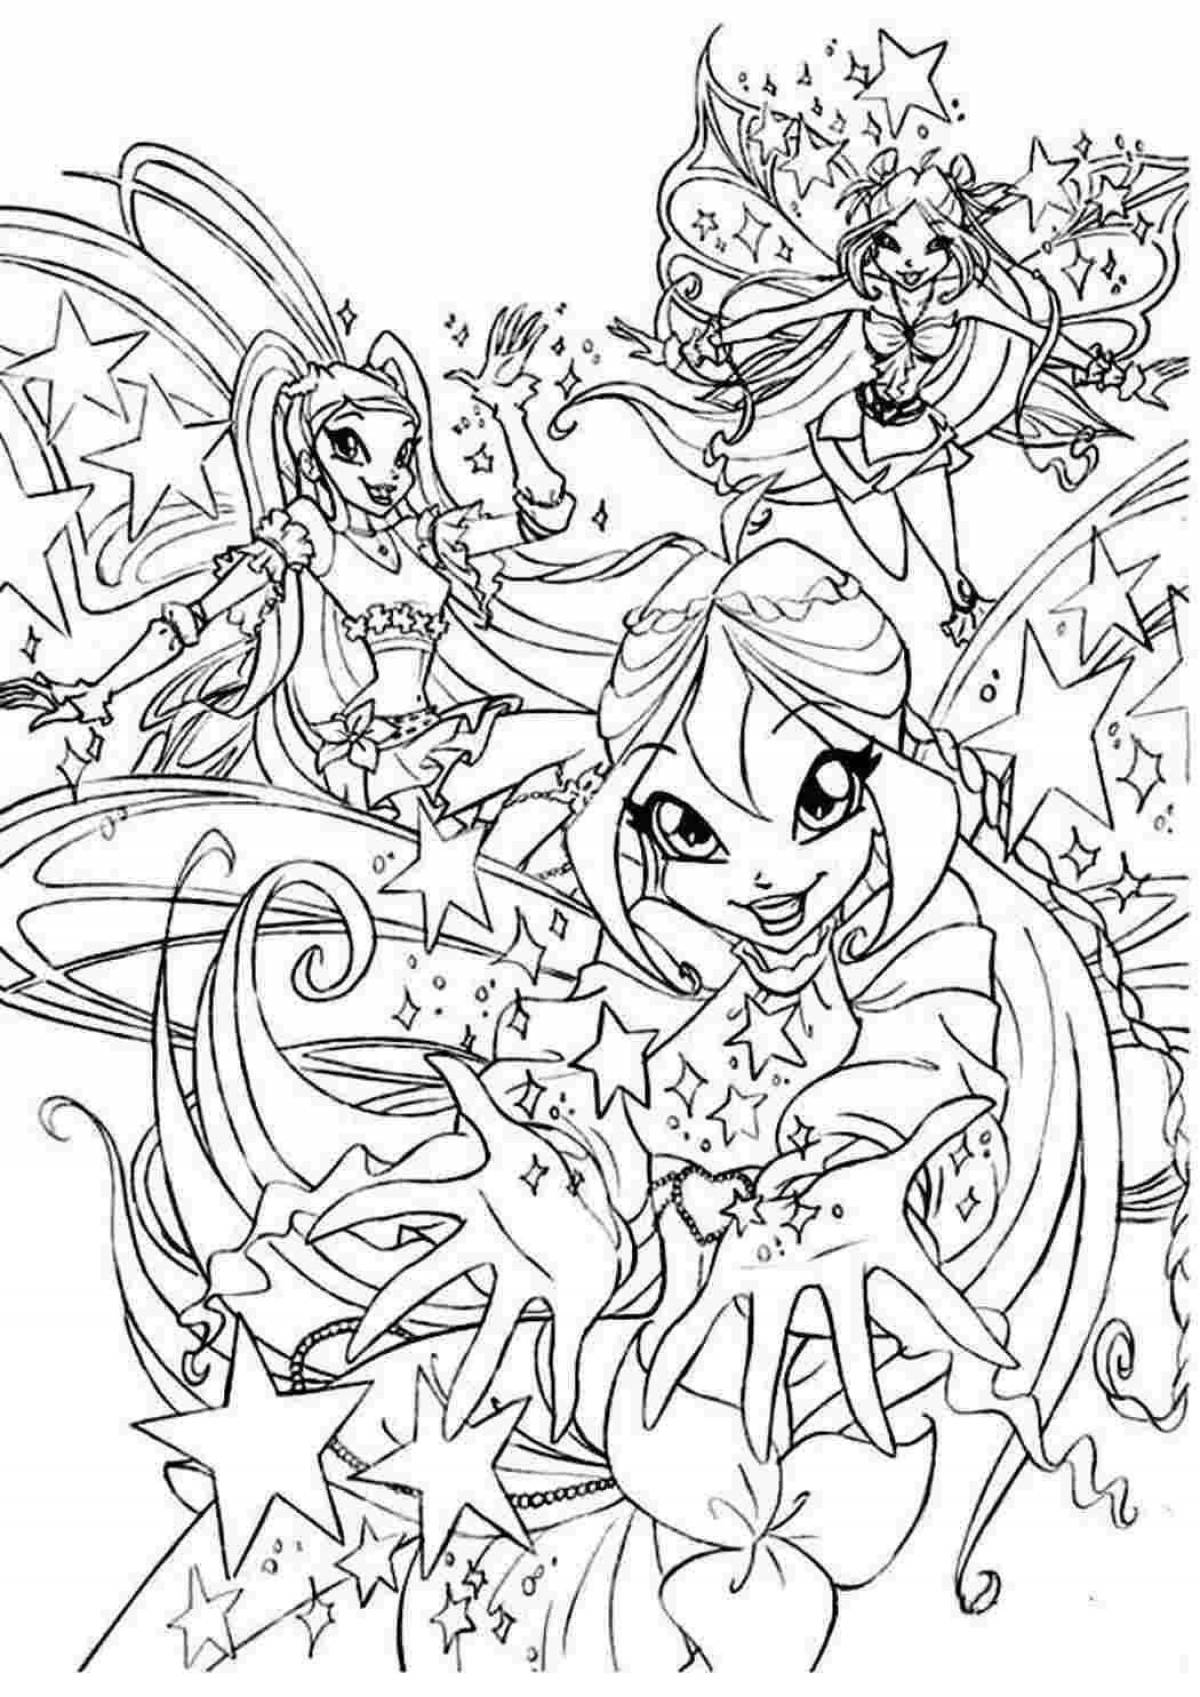 Playful Winx Christmas coloring book